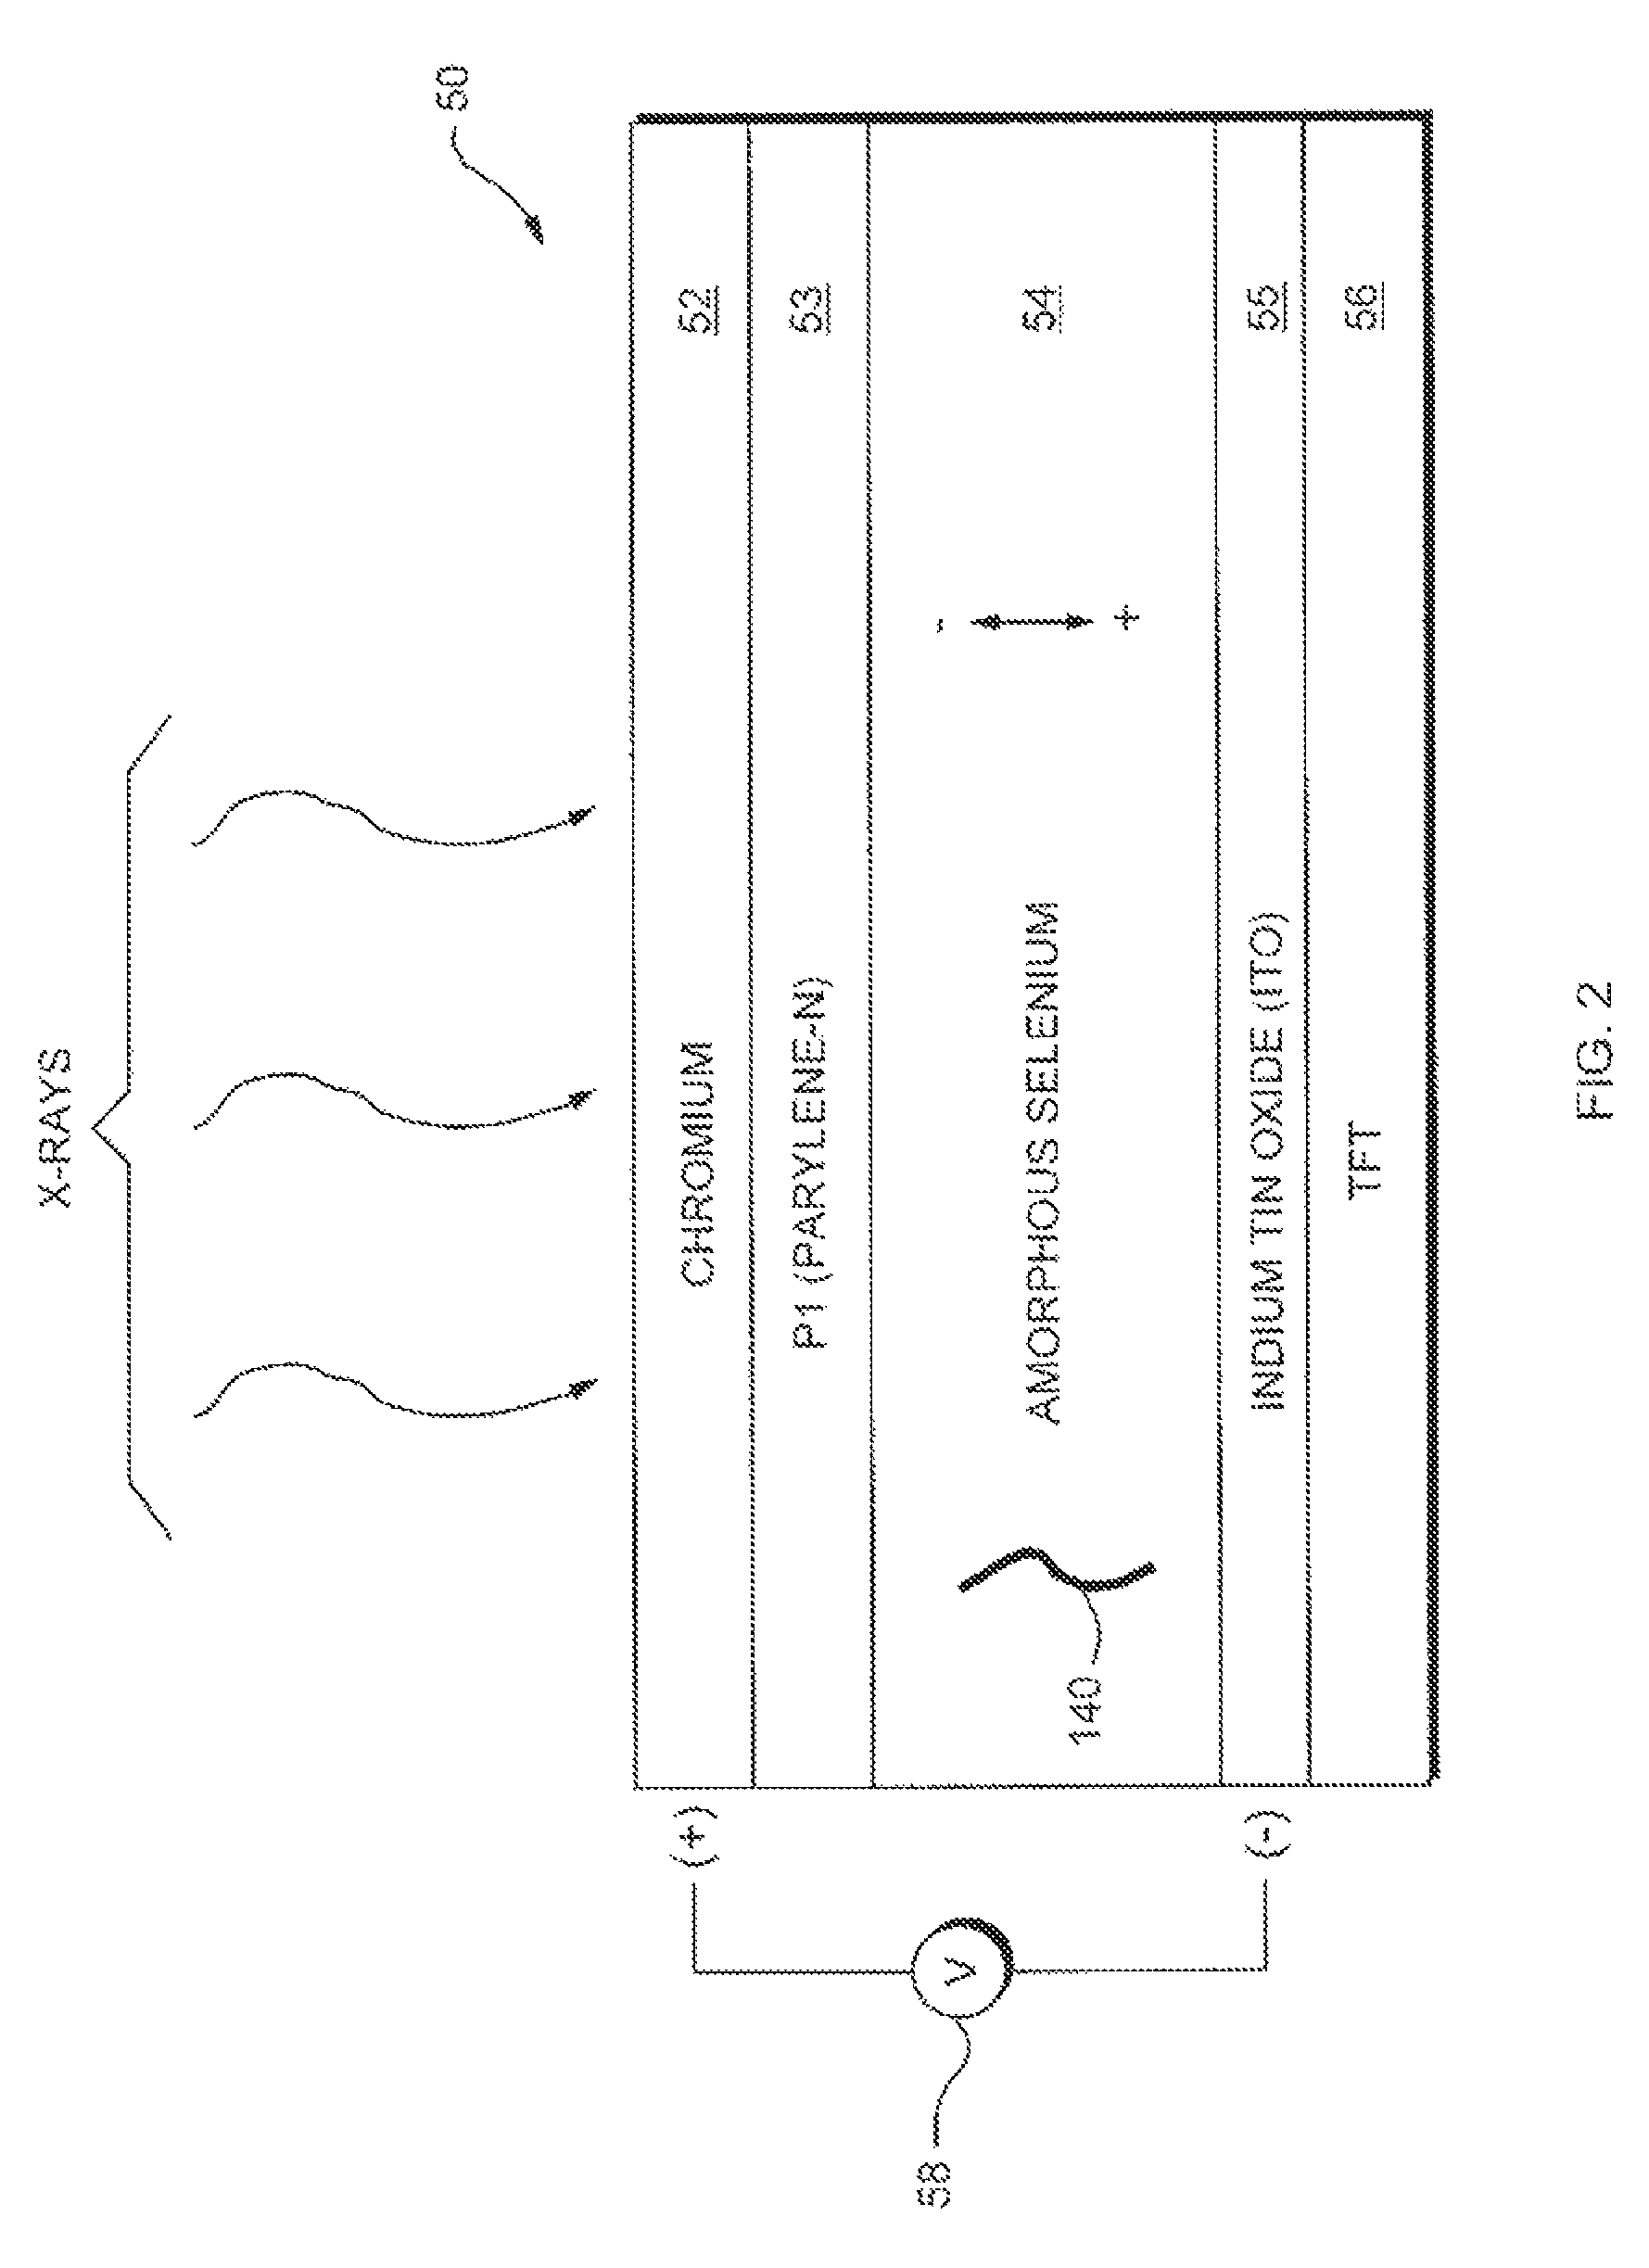 System and device for non-destructive Raman analysis